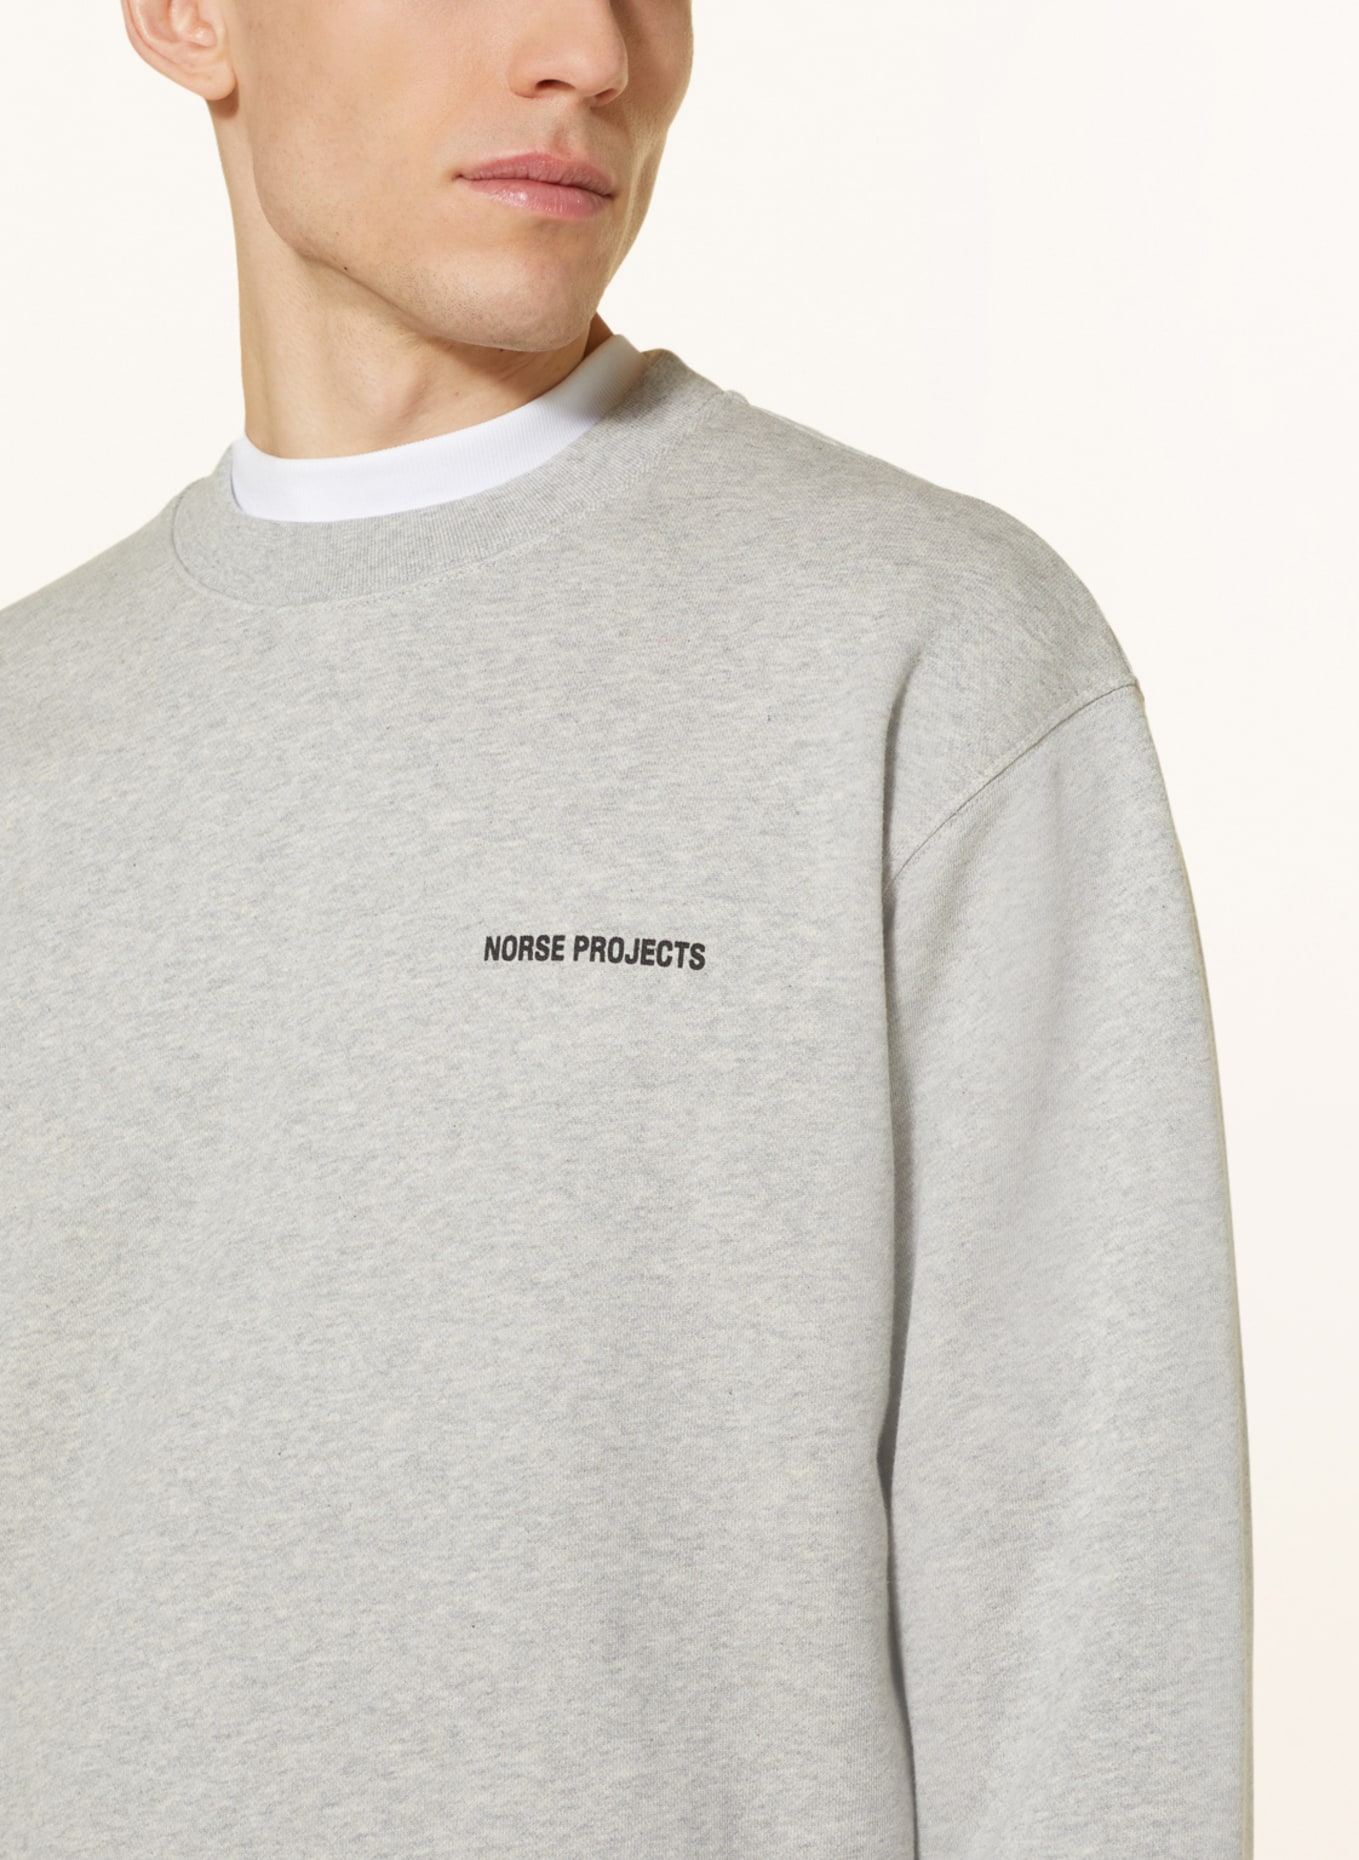 NORSE PROJECTS Sweatshirt ARNE, Color: LIGHT GRAY (Image 4)